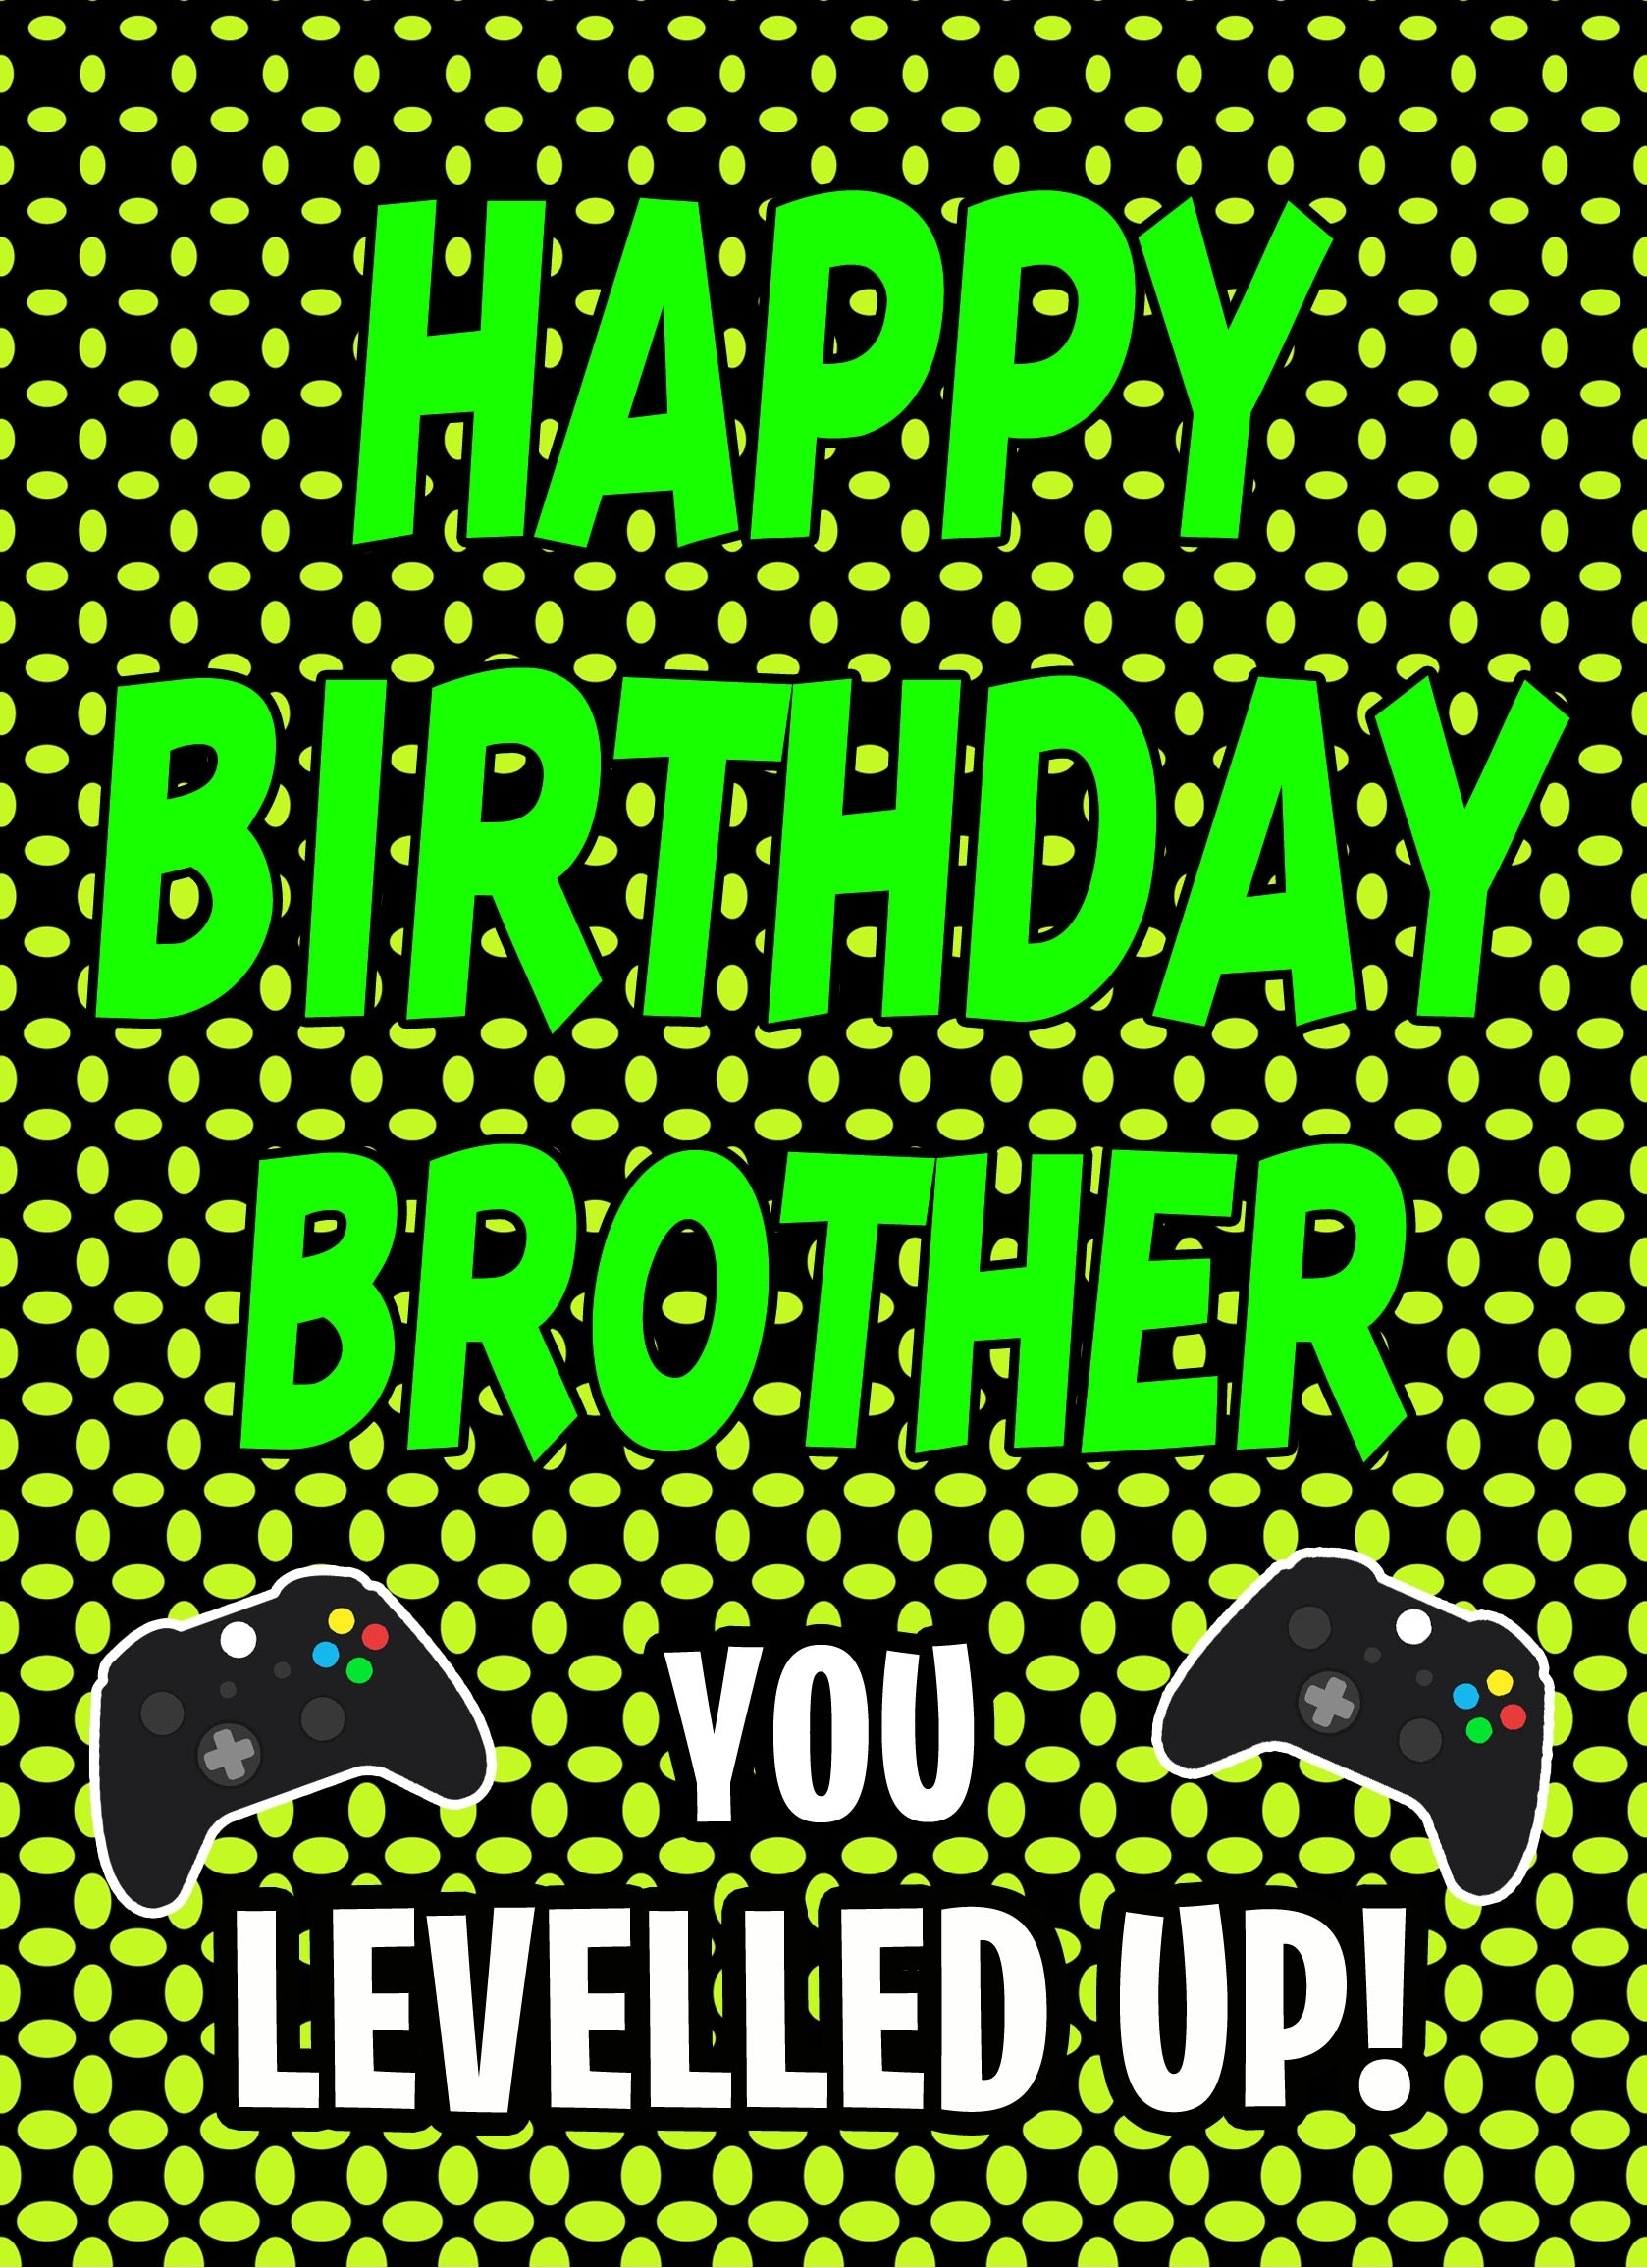 Gamer Birthday Card For Brother (Levelled Up)